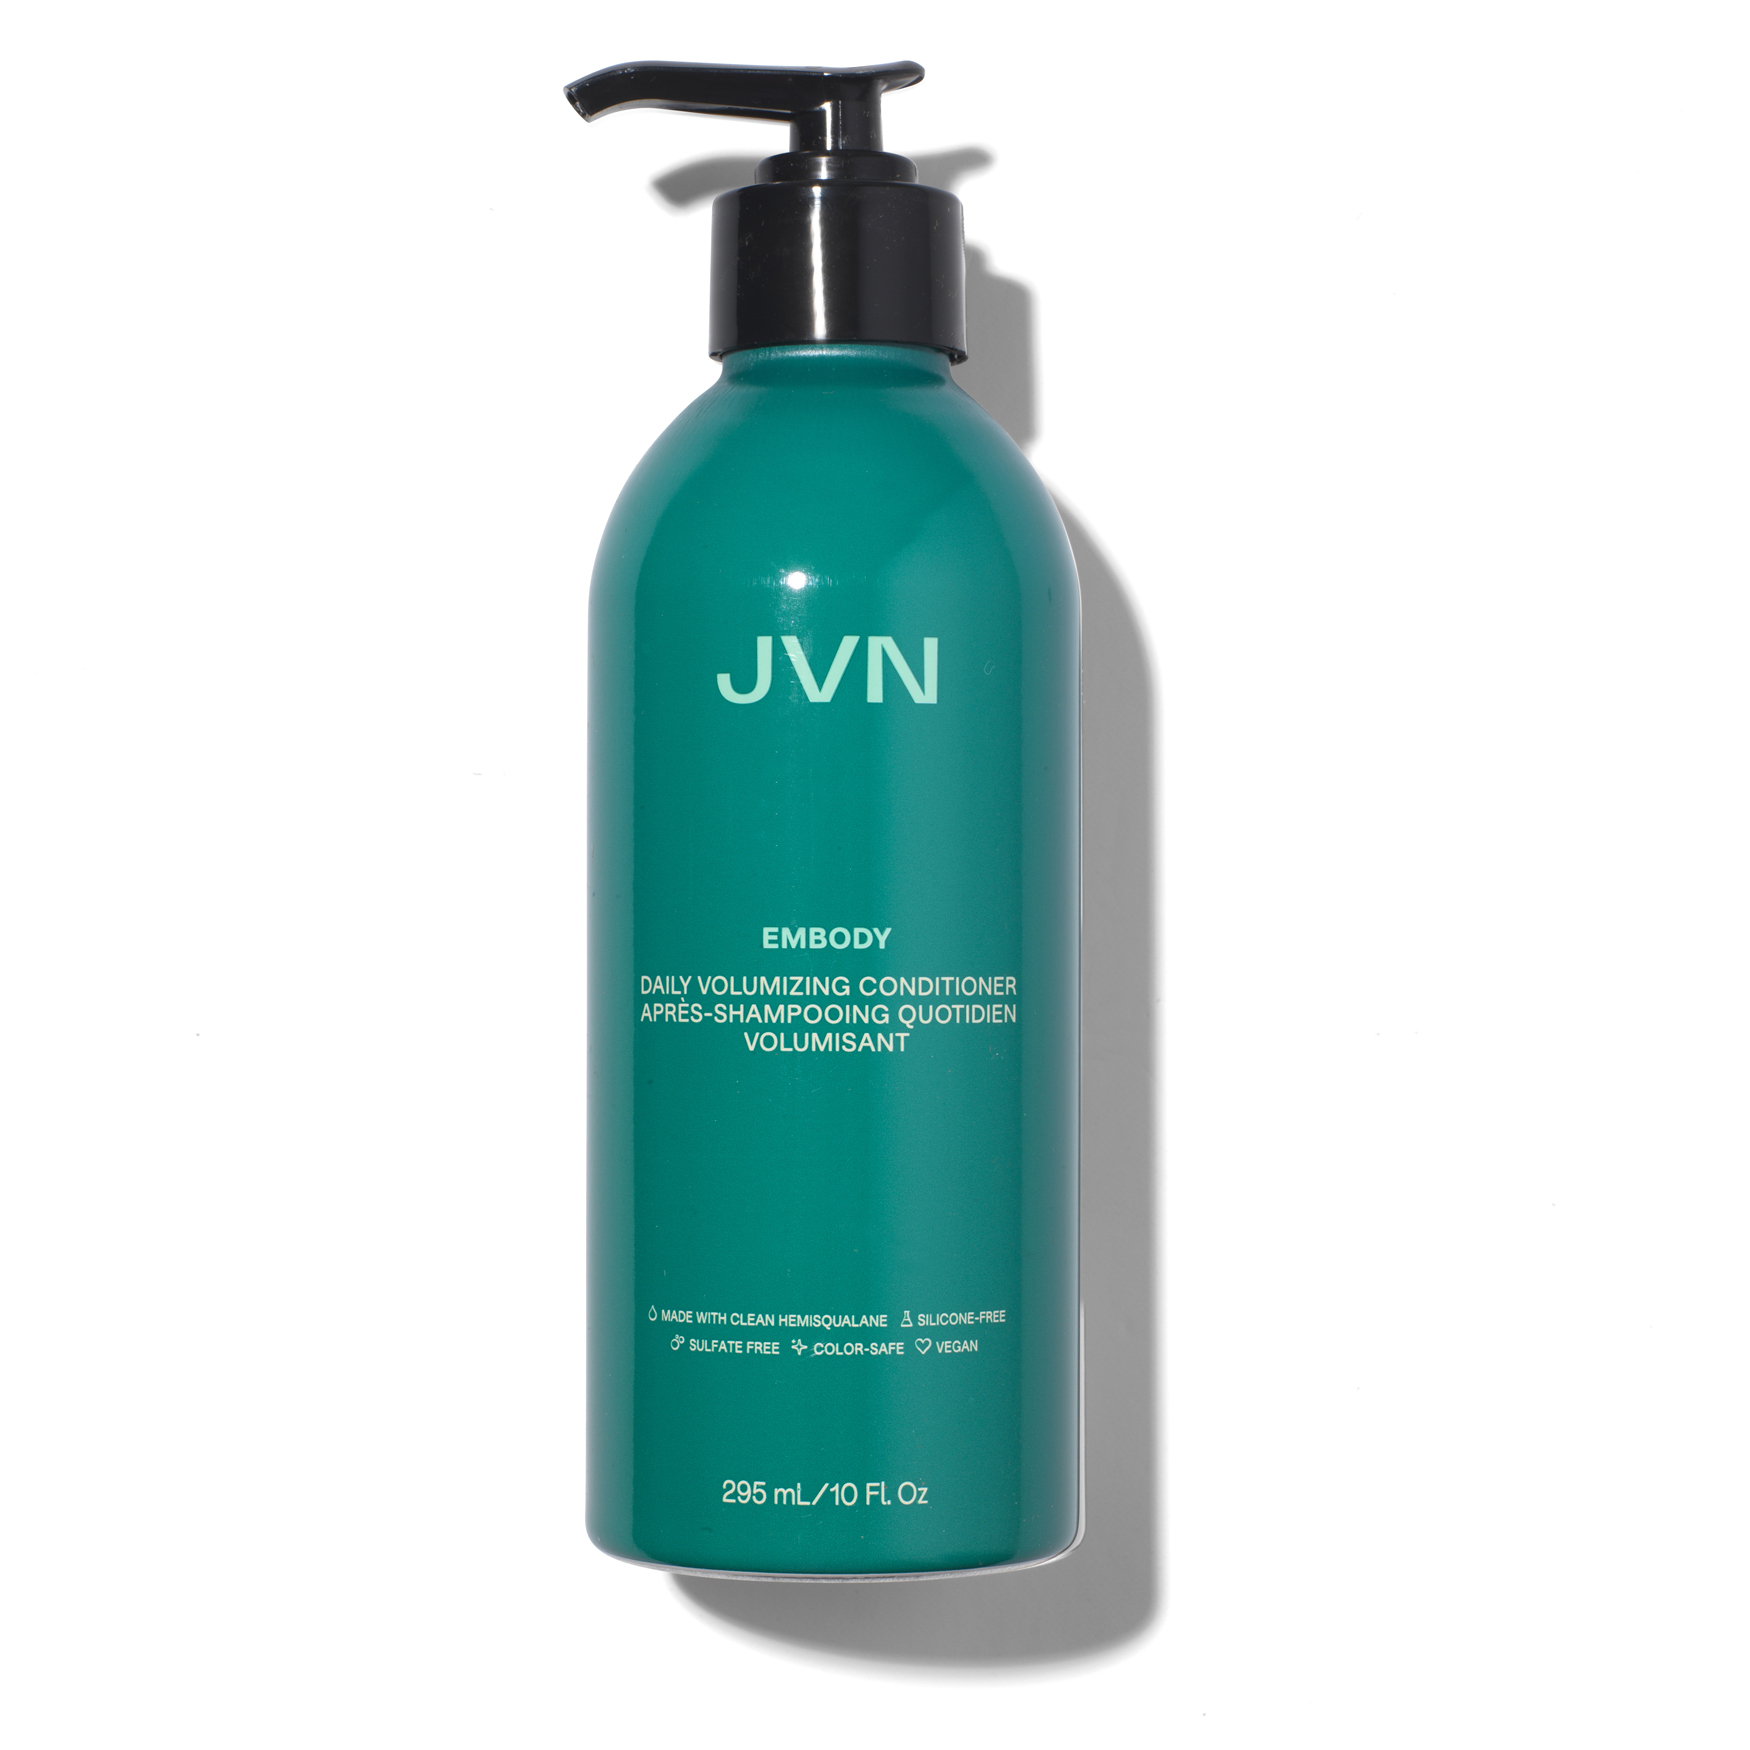 JVN Hair Embody Daily Volumizing Conditioner | Space NK